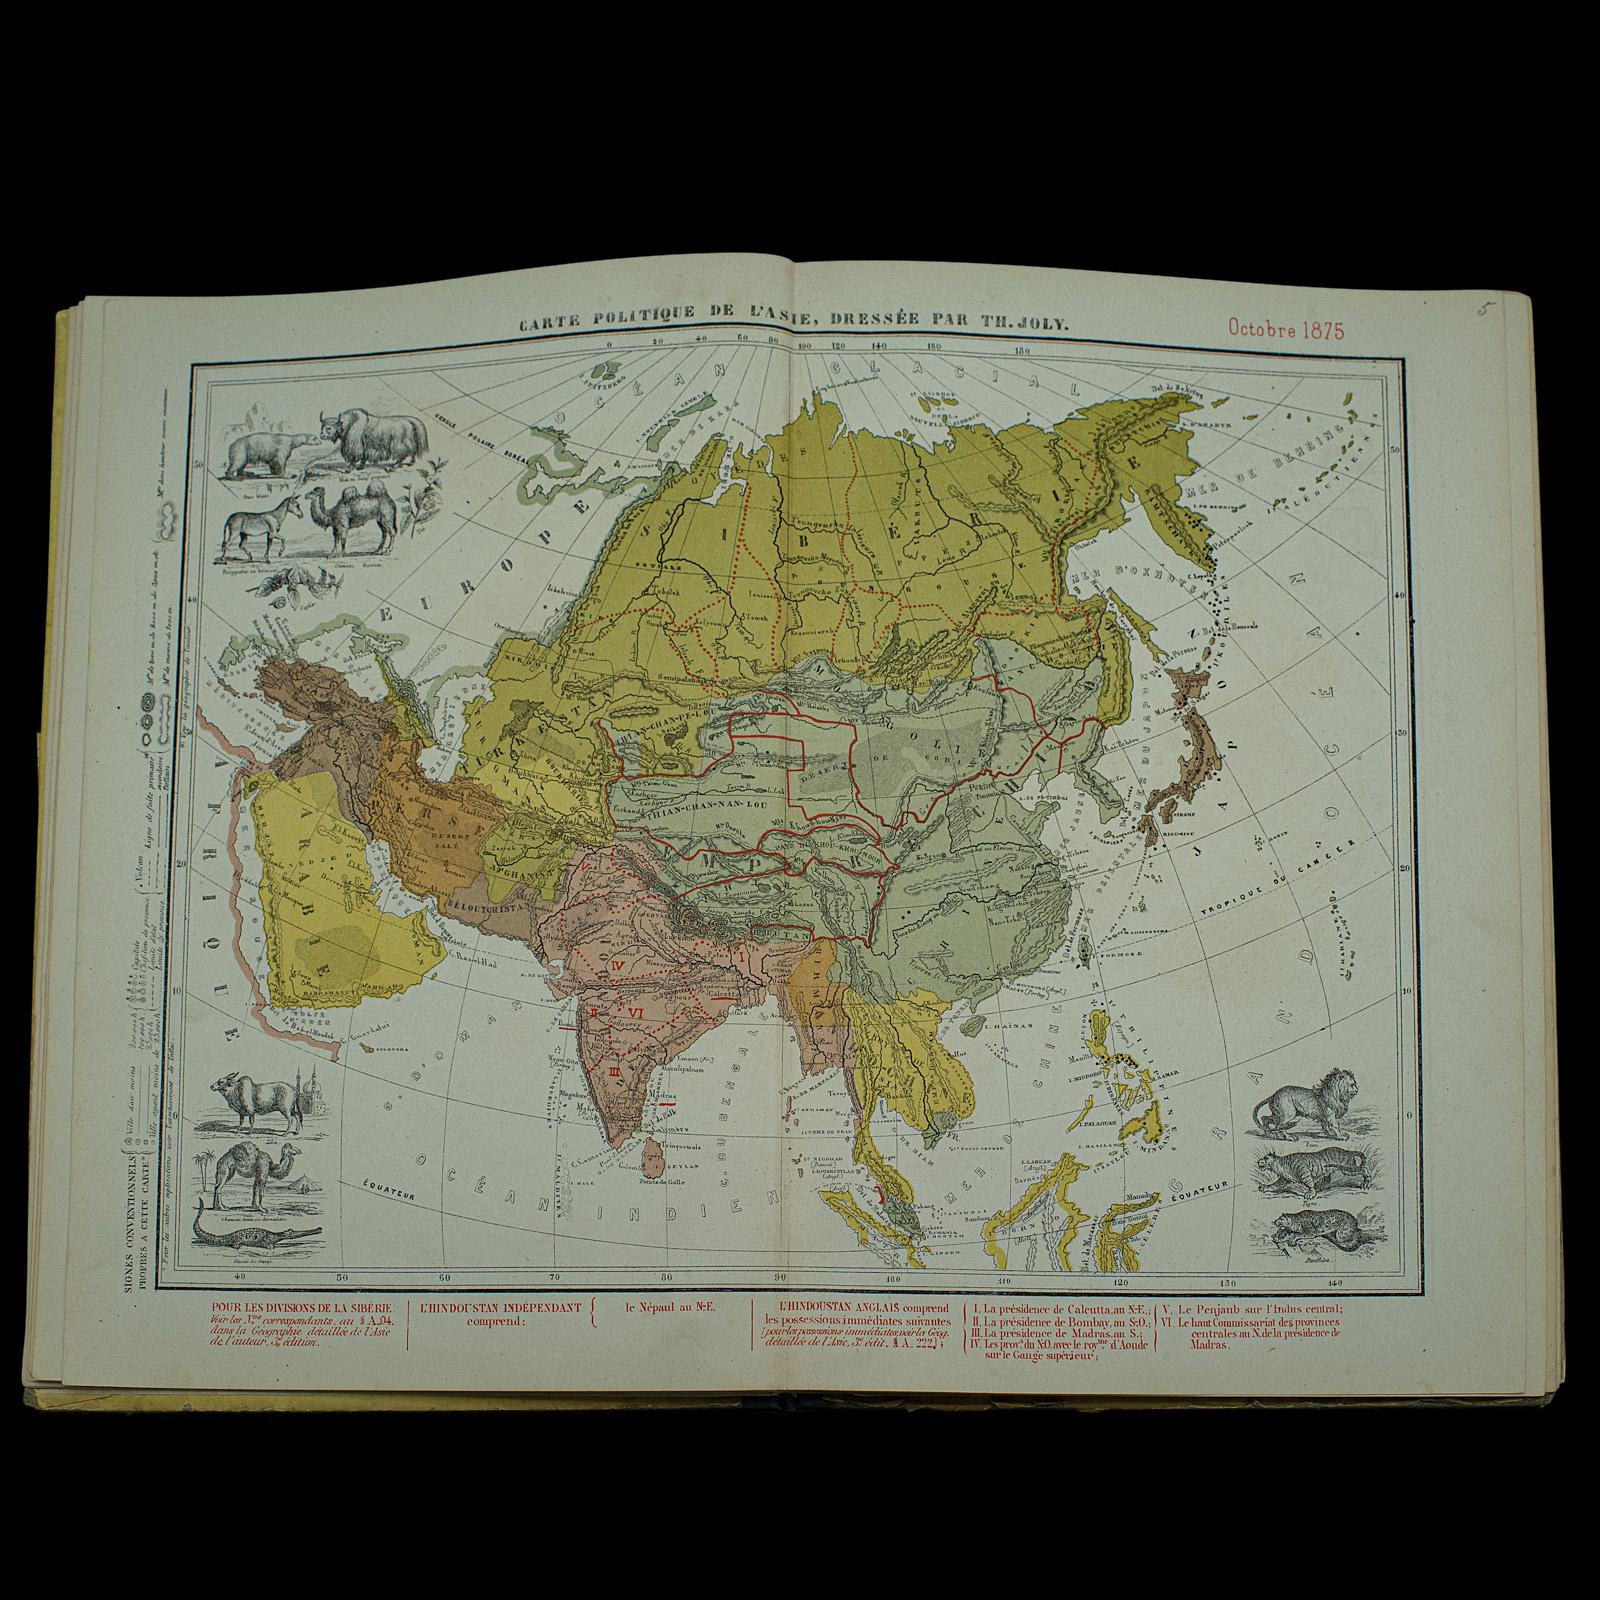 Antique World Atlas, French Language, Cartography, Reference Book, Victorian 1